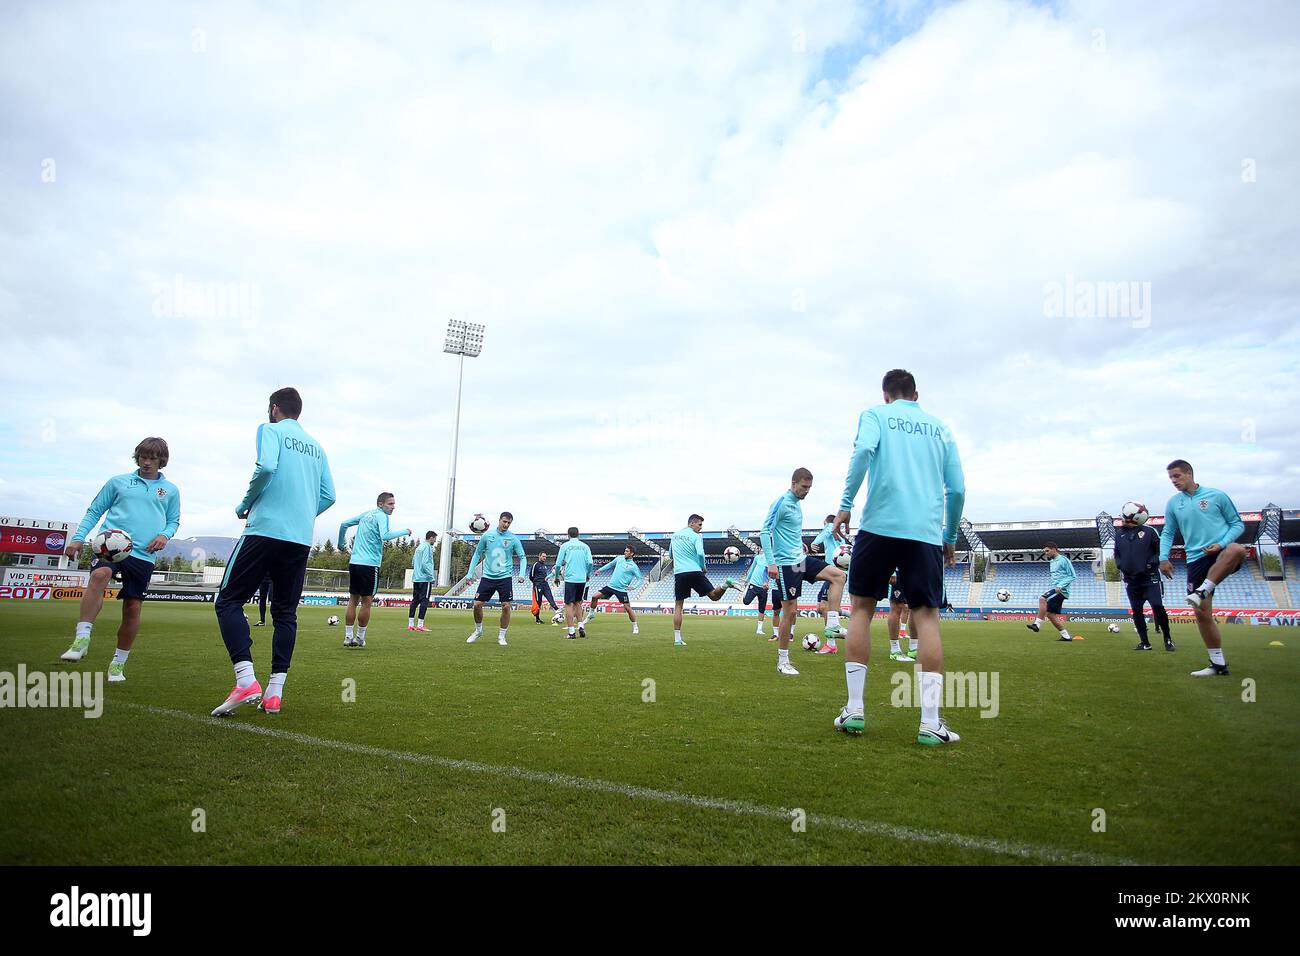 10.06.2017., Stadium Laugardalsvollur, Reykjavik, Iceland - Training of the Croatian Football Team on the day before the qualifying match with Iceland for the World Championships in Russia in 2018. Photo: Goran Stanzl/PIXSELL Stock Photo